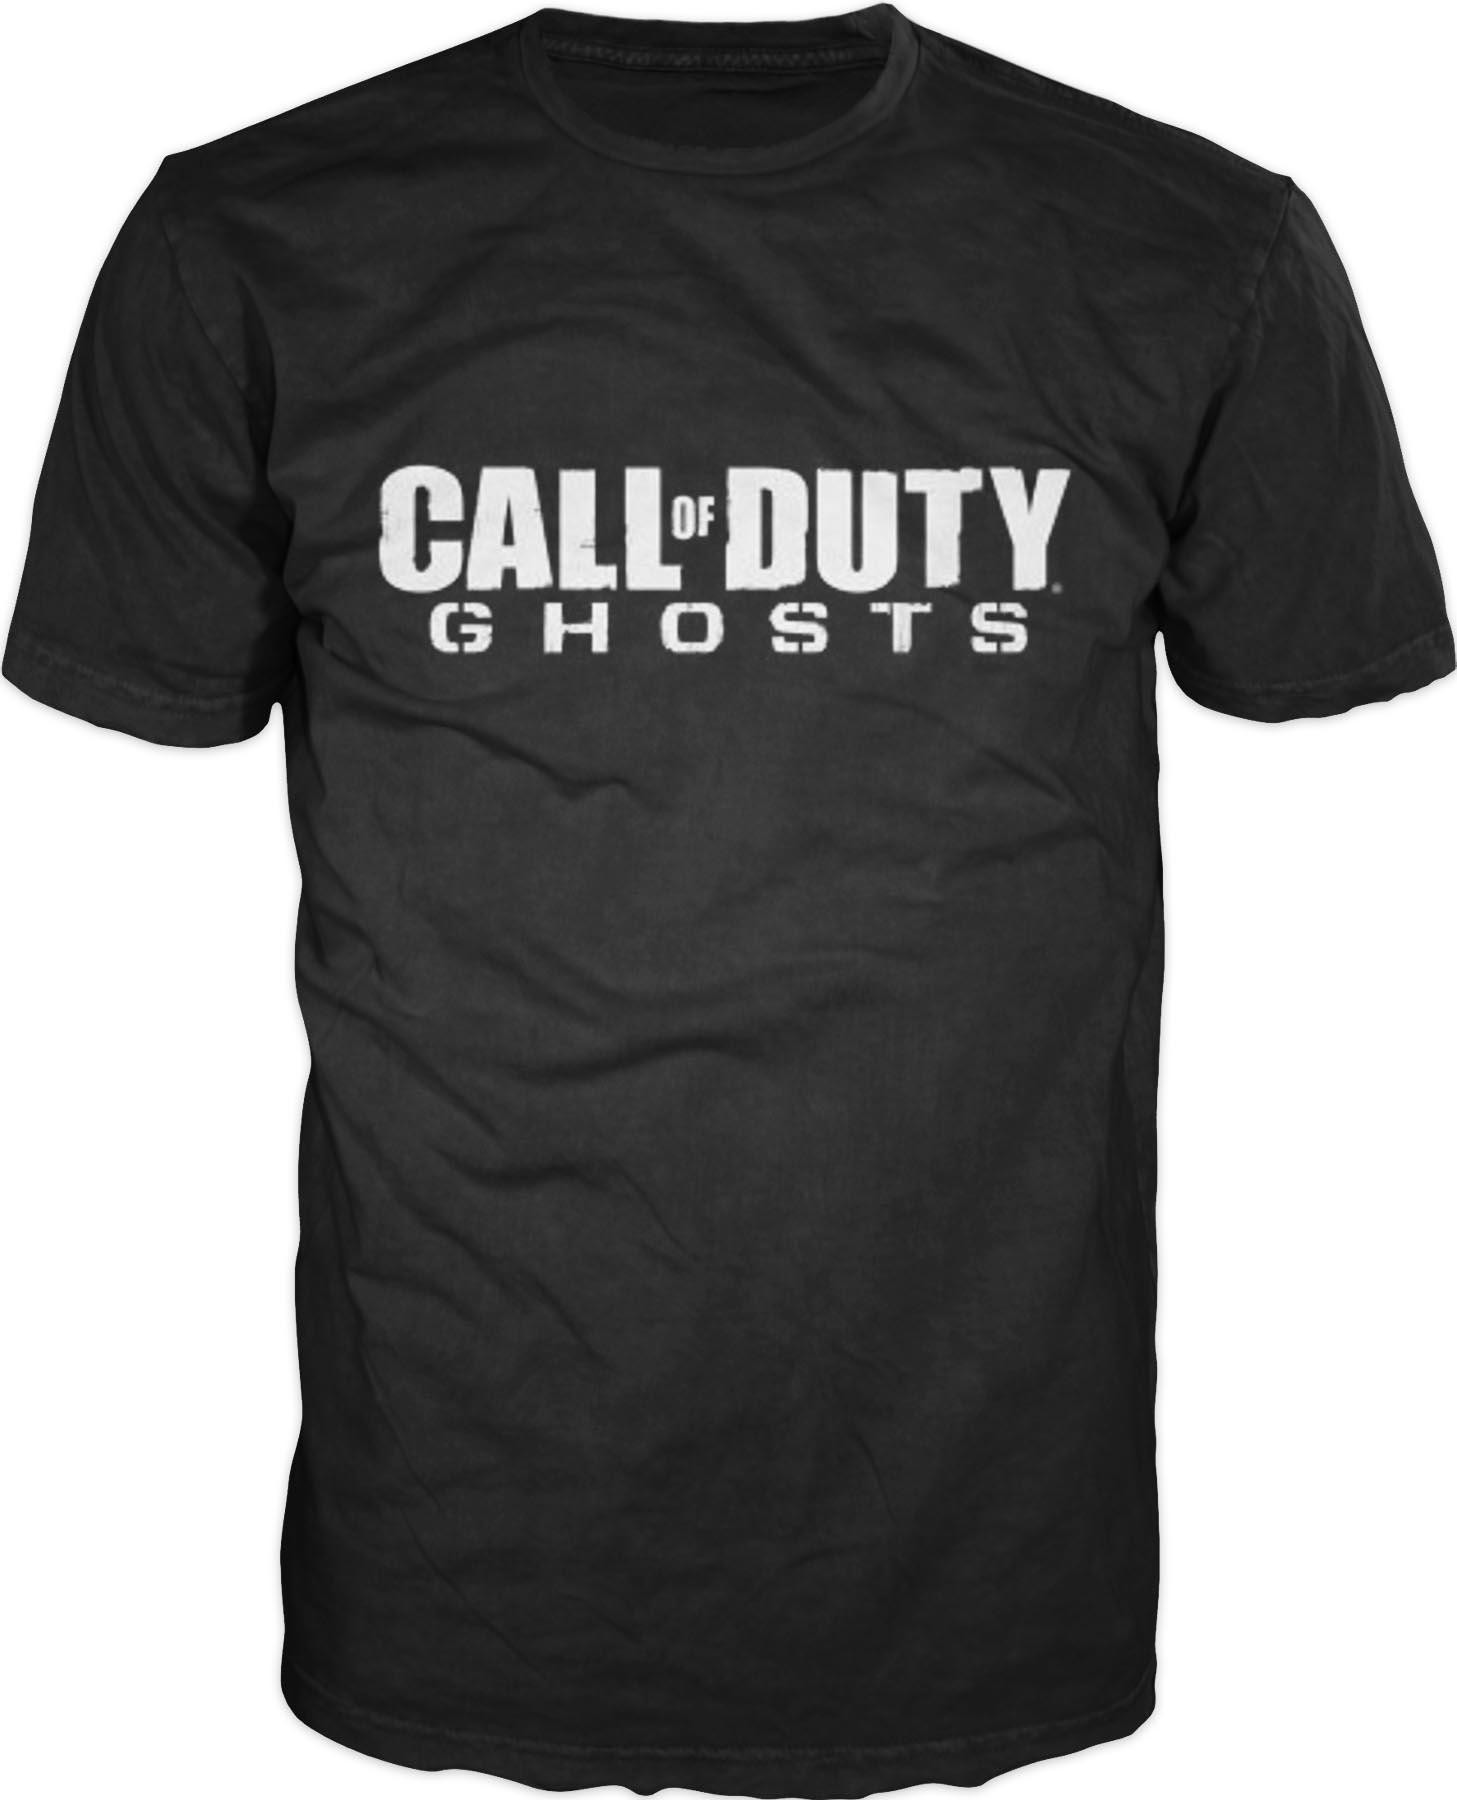 Activision Men's Graphic T-Shirt - Call of Duty: Ghosts